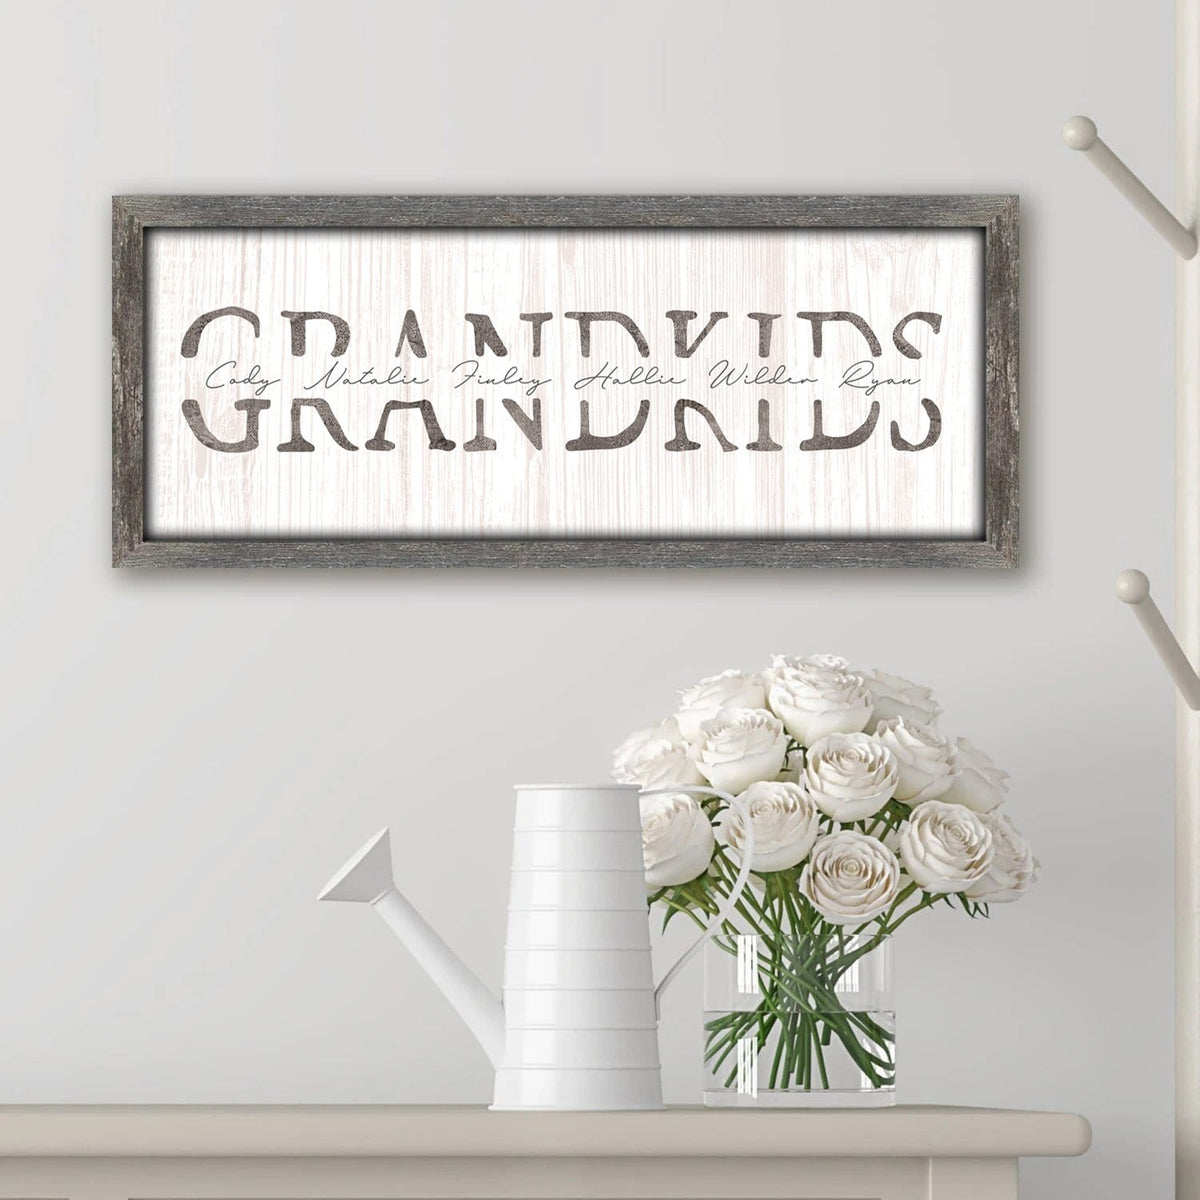 Personalized gift for grandparents with names of grandchildren in the art